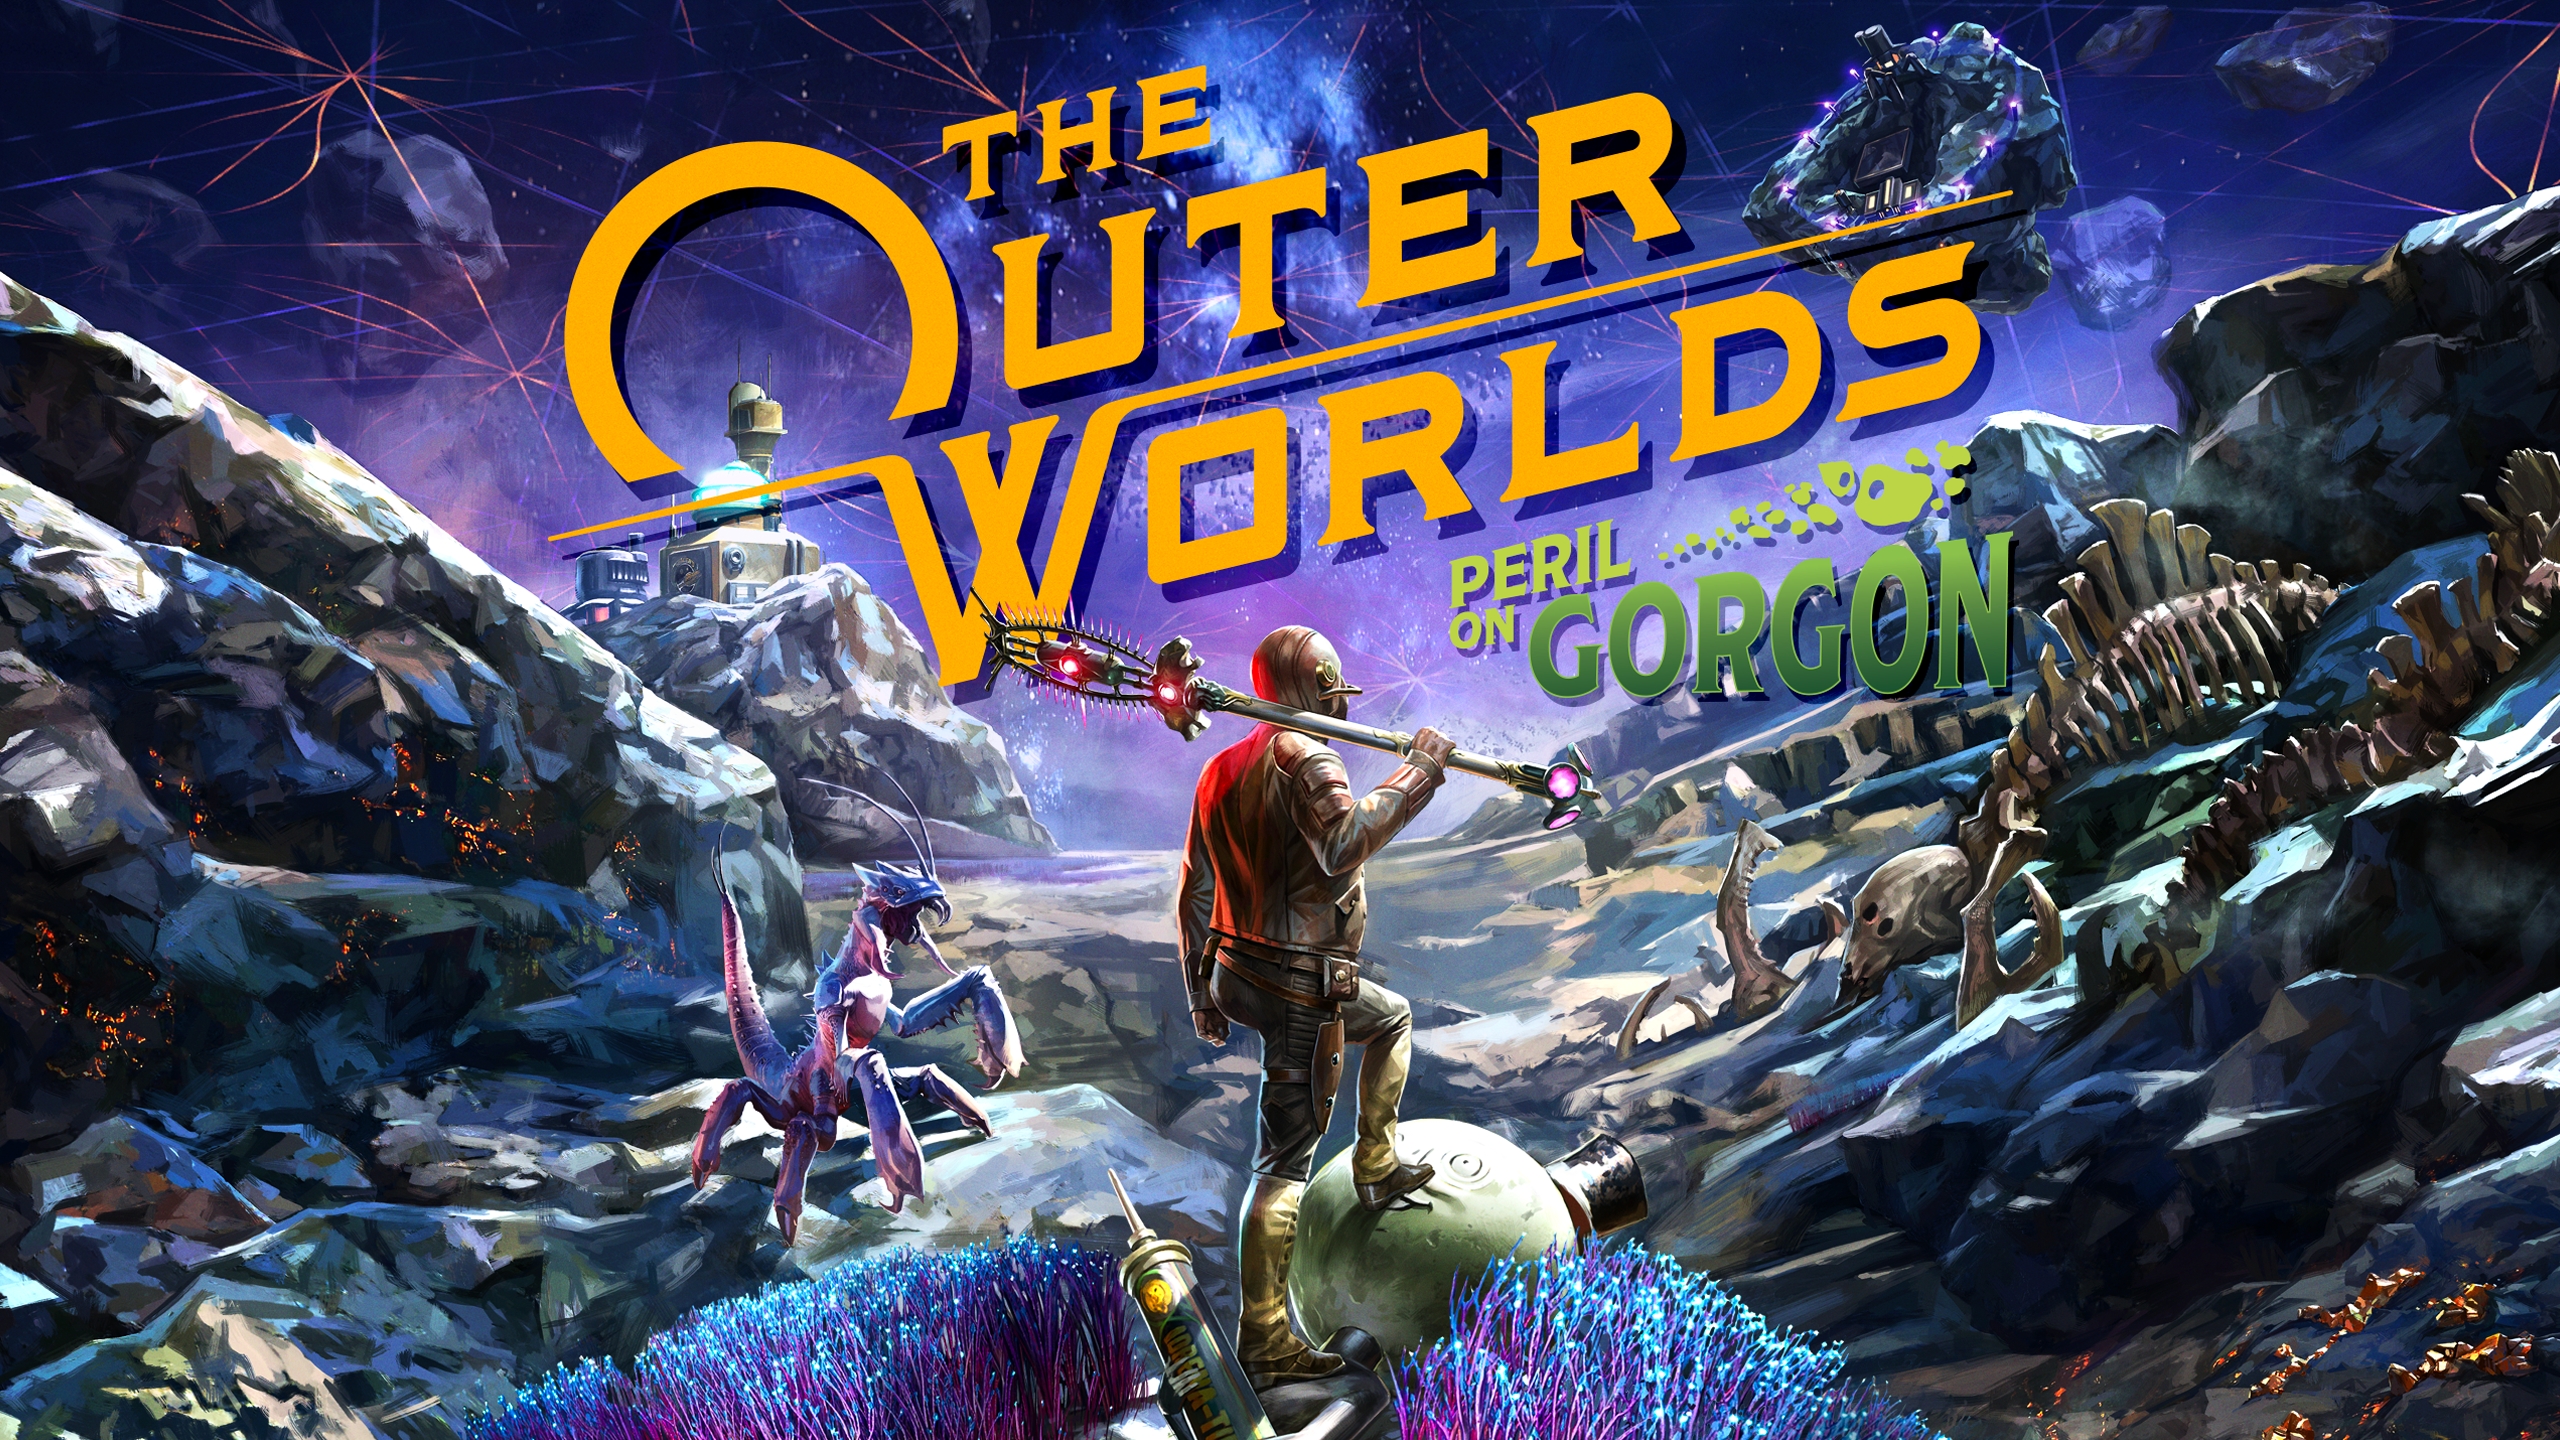 The Outer Worlds: Peril on Gorgon (Video Game 2020) - IMDb